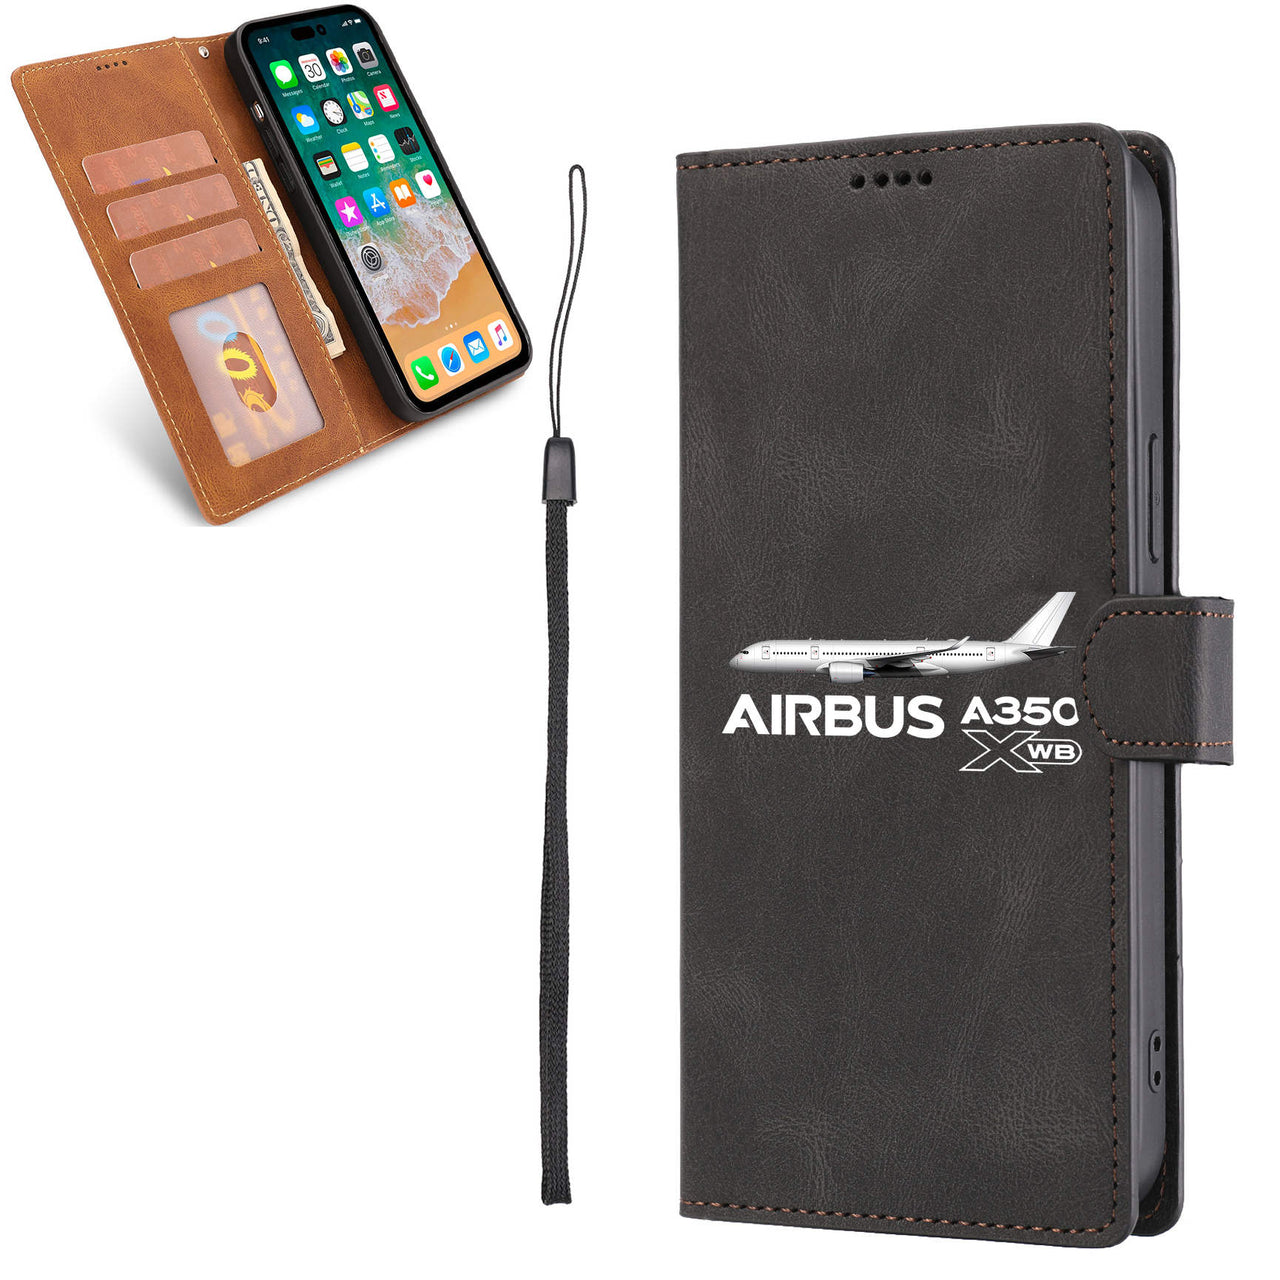 The Airbus A350 WXB Designed Leather iPhone Cases